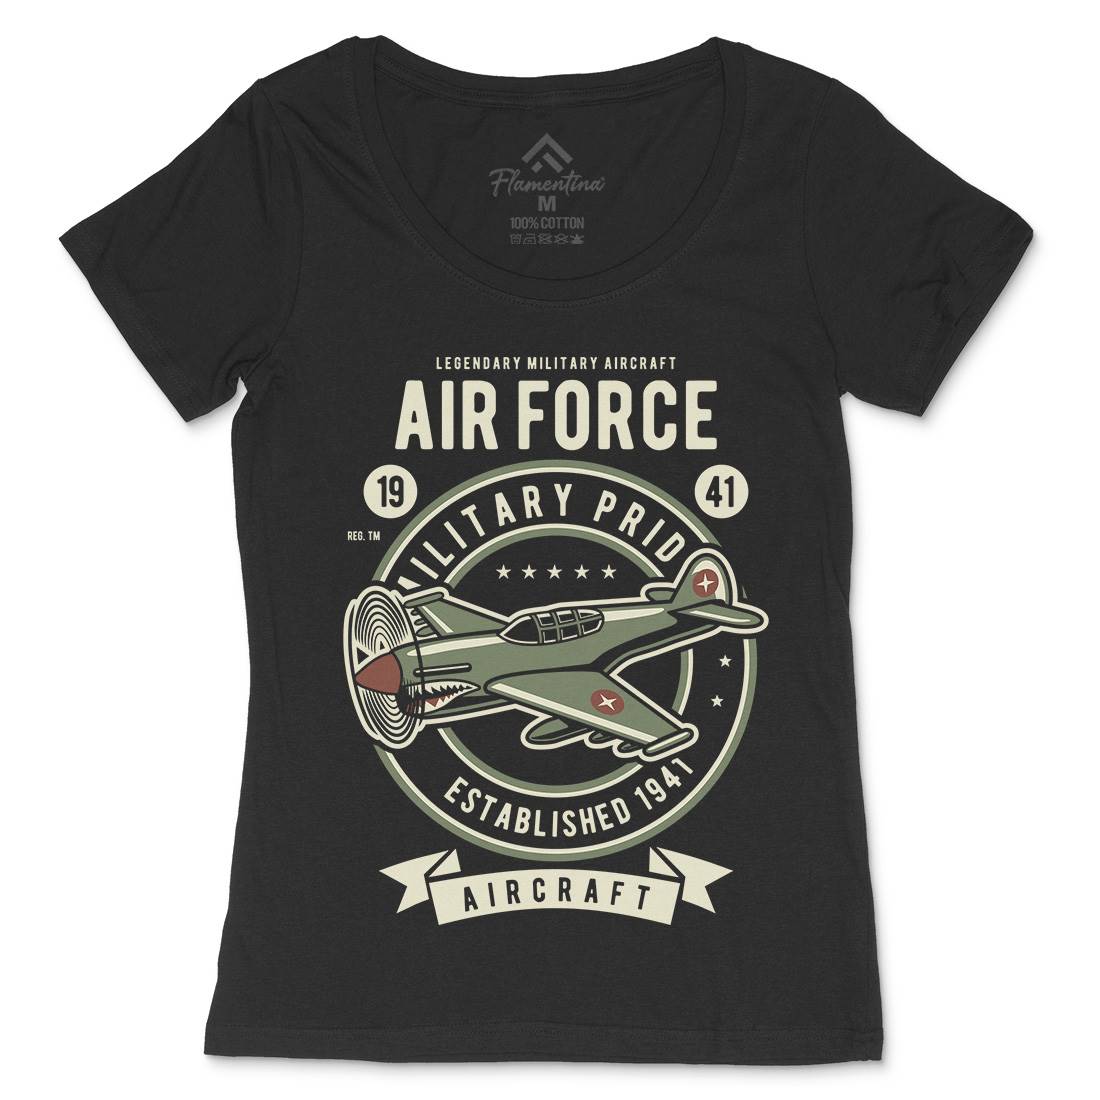 Air Force Womens Scoop Neck T-Shirt Army D502